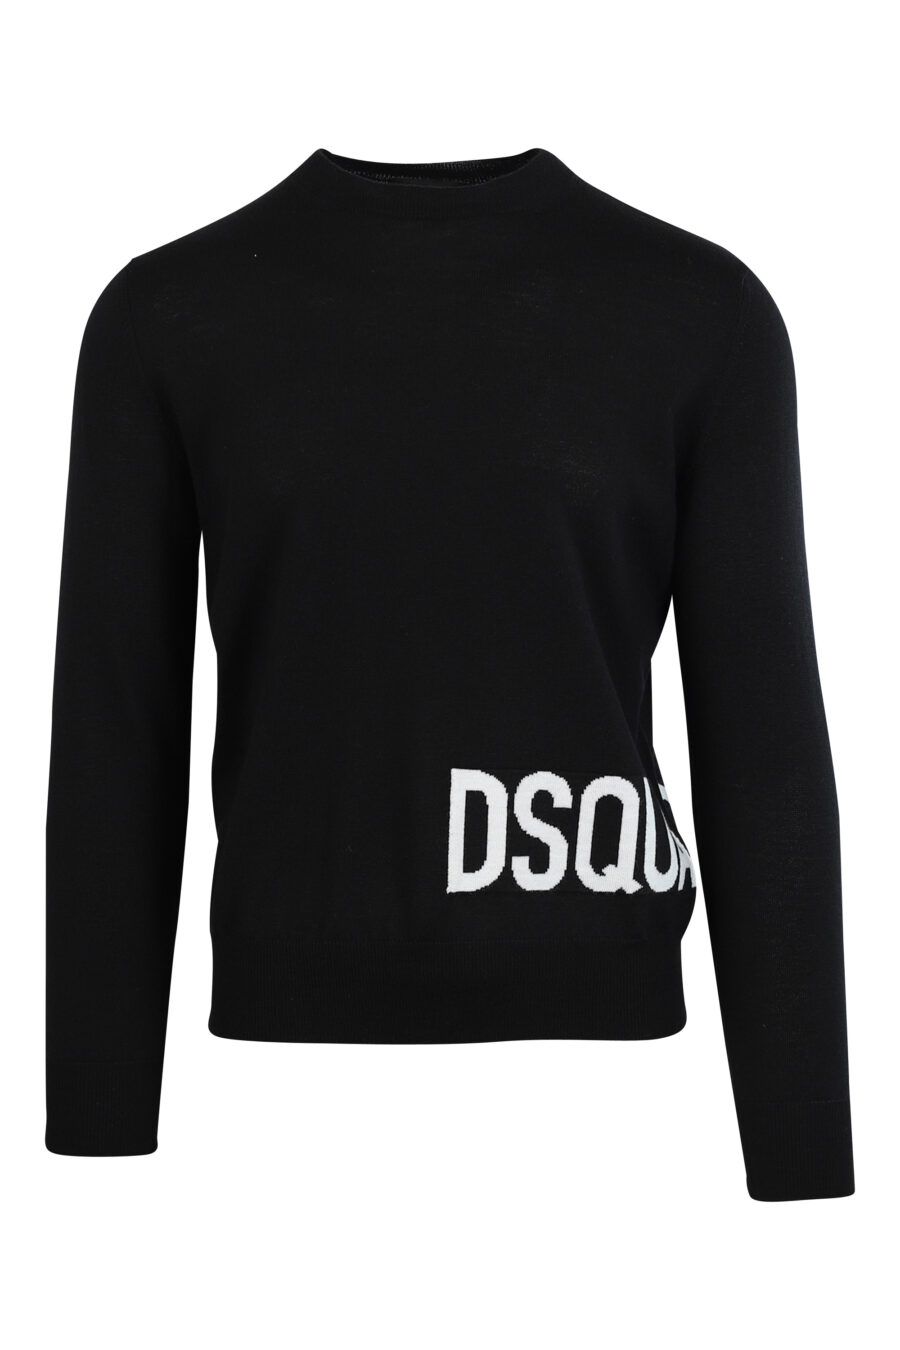 Black jumper with white side maxilogue - 8054148066710